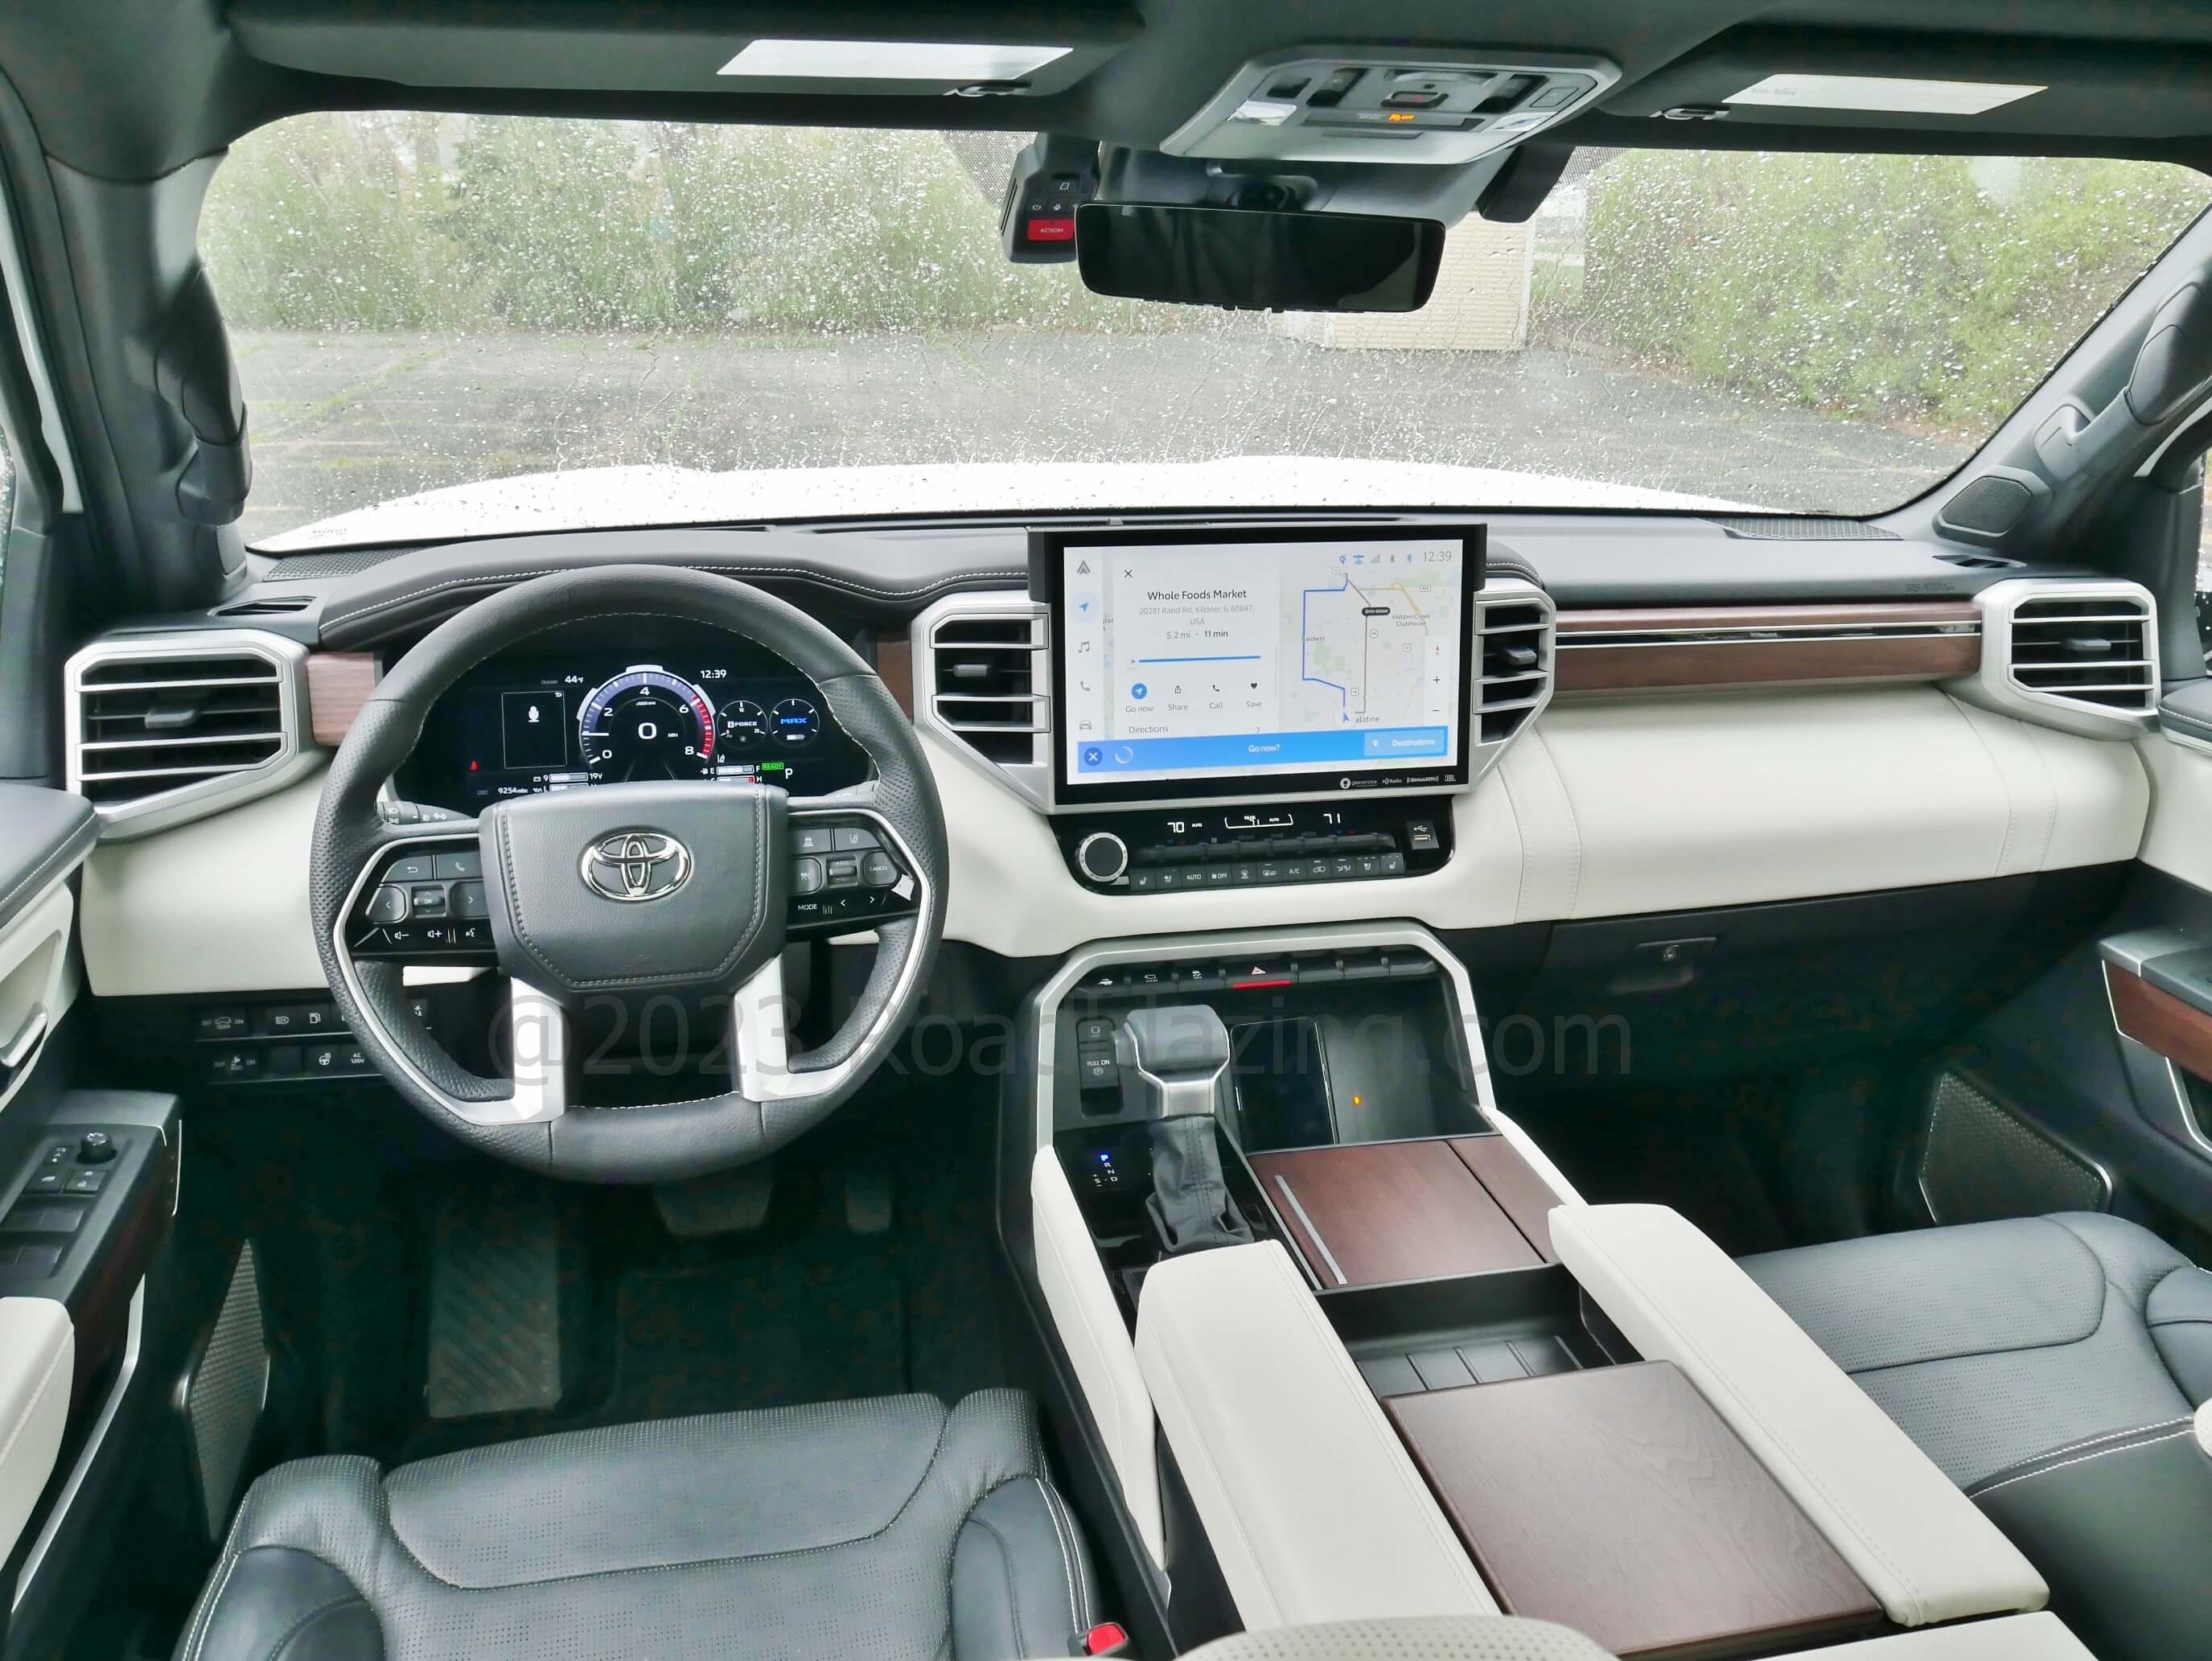 2023 Toyota Sequoia Capstone 4x4: woodsy, chromey cabin with huge 14.0" touch LCD media display